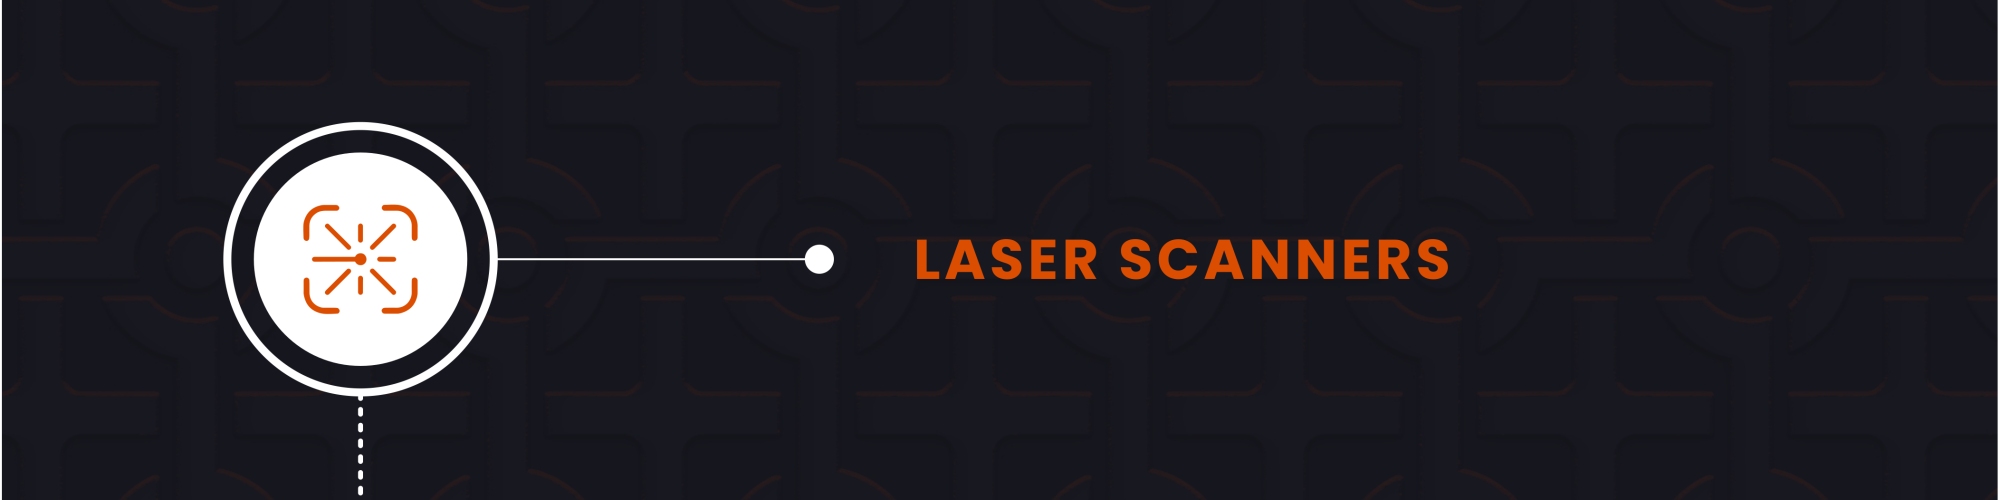 Laser Scanners